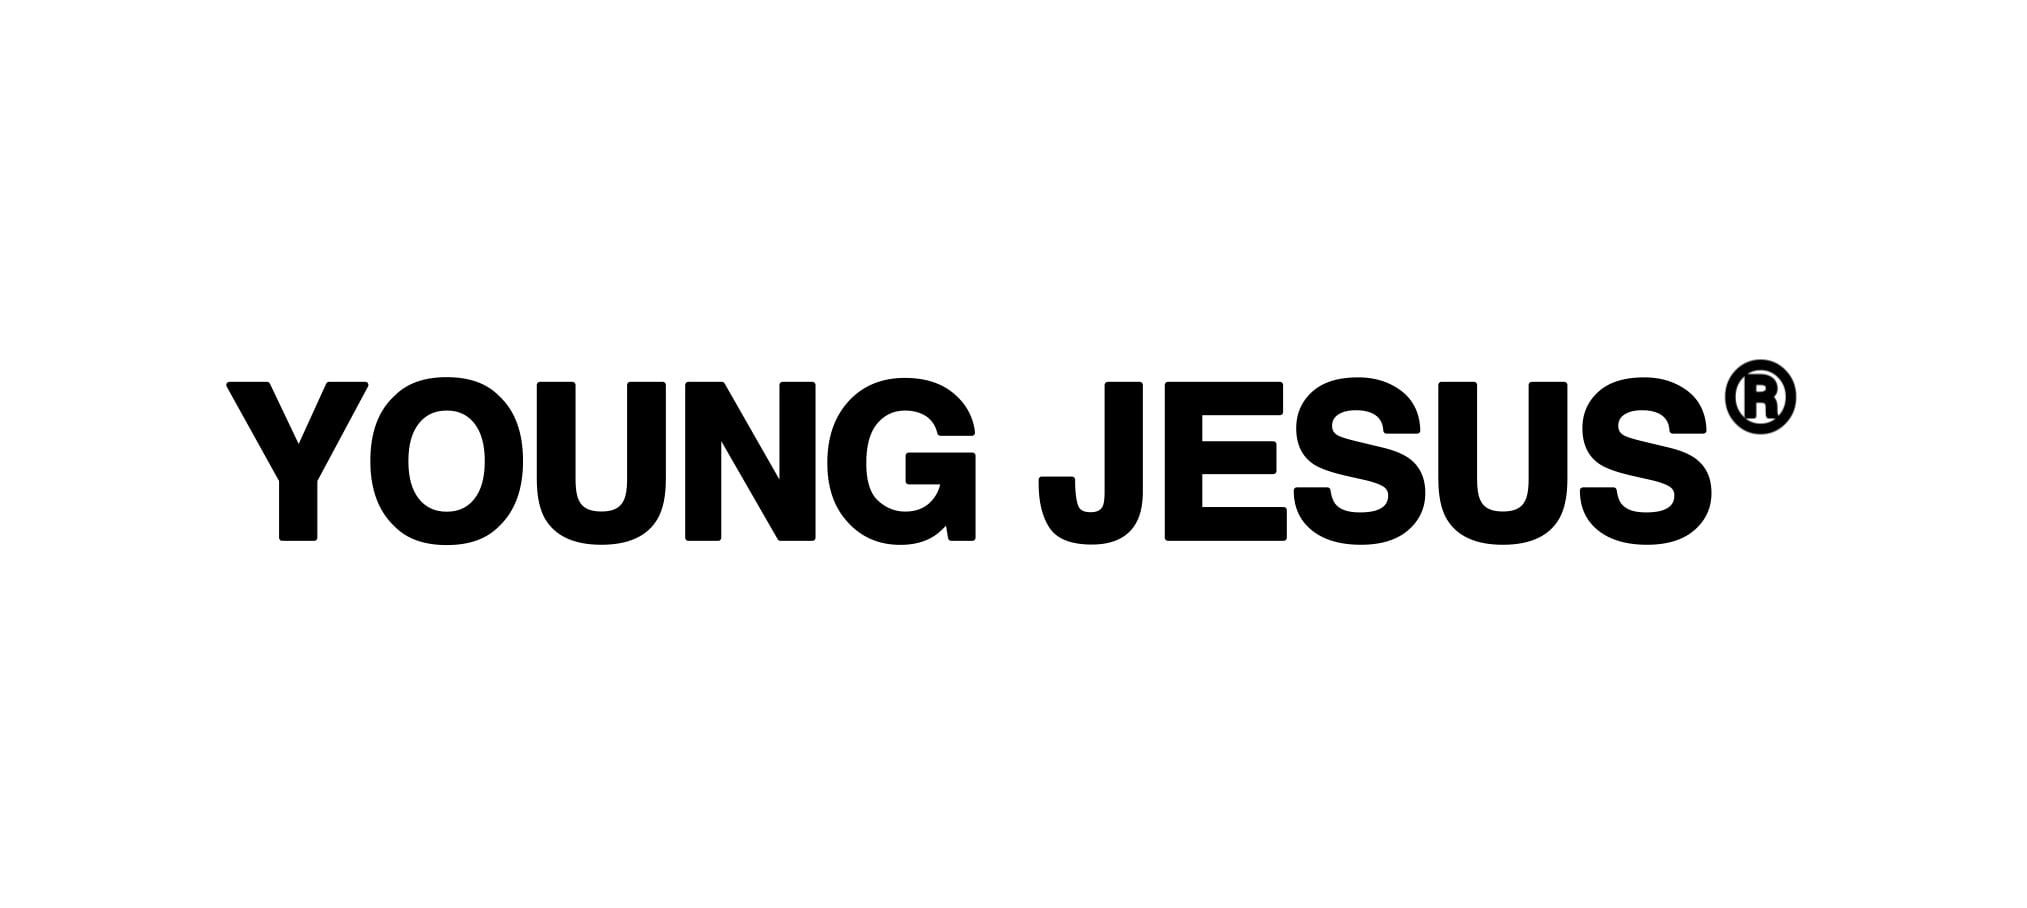 YOUNG JESUS®︎